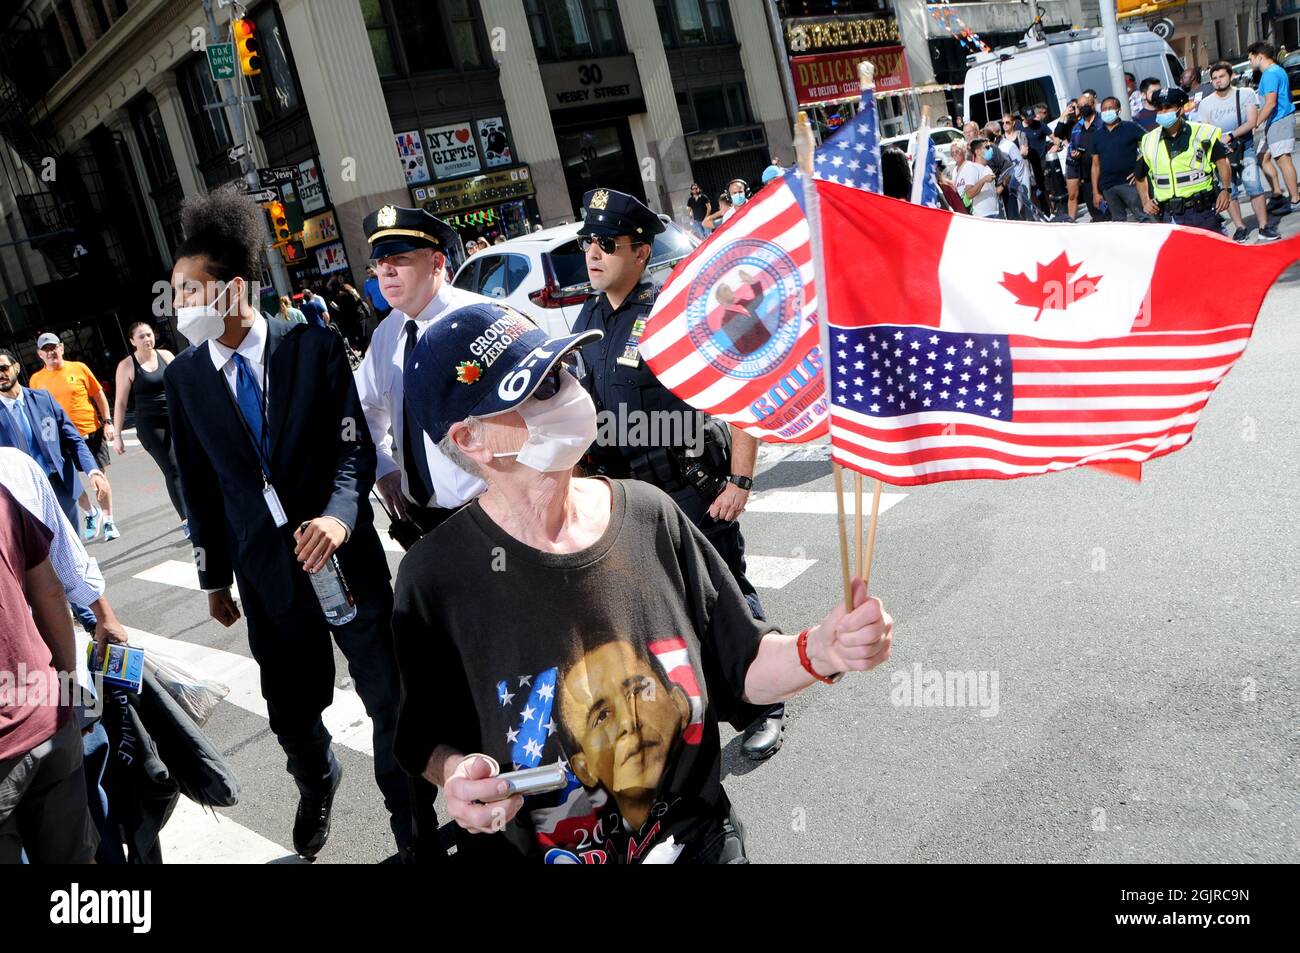 New York City, United States. 11th Sep, 2021. A person holds flags on the 20th Anniversary of the events of 9/11, in New York City. (Photo by Efren Landaos/SOPA Images/Sipa USA) Credit: Sipa USA/Alamy Live News Stock Photo